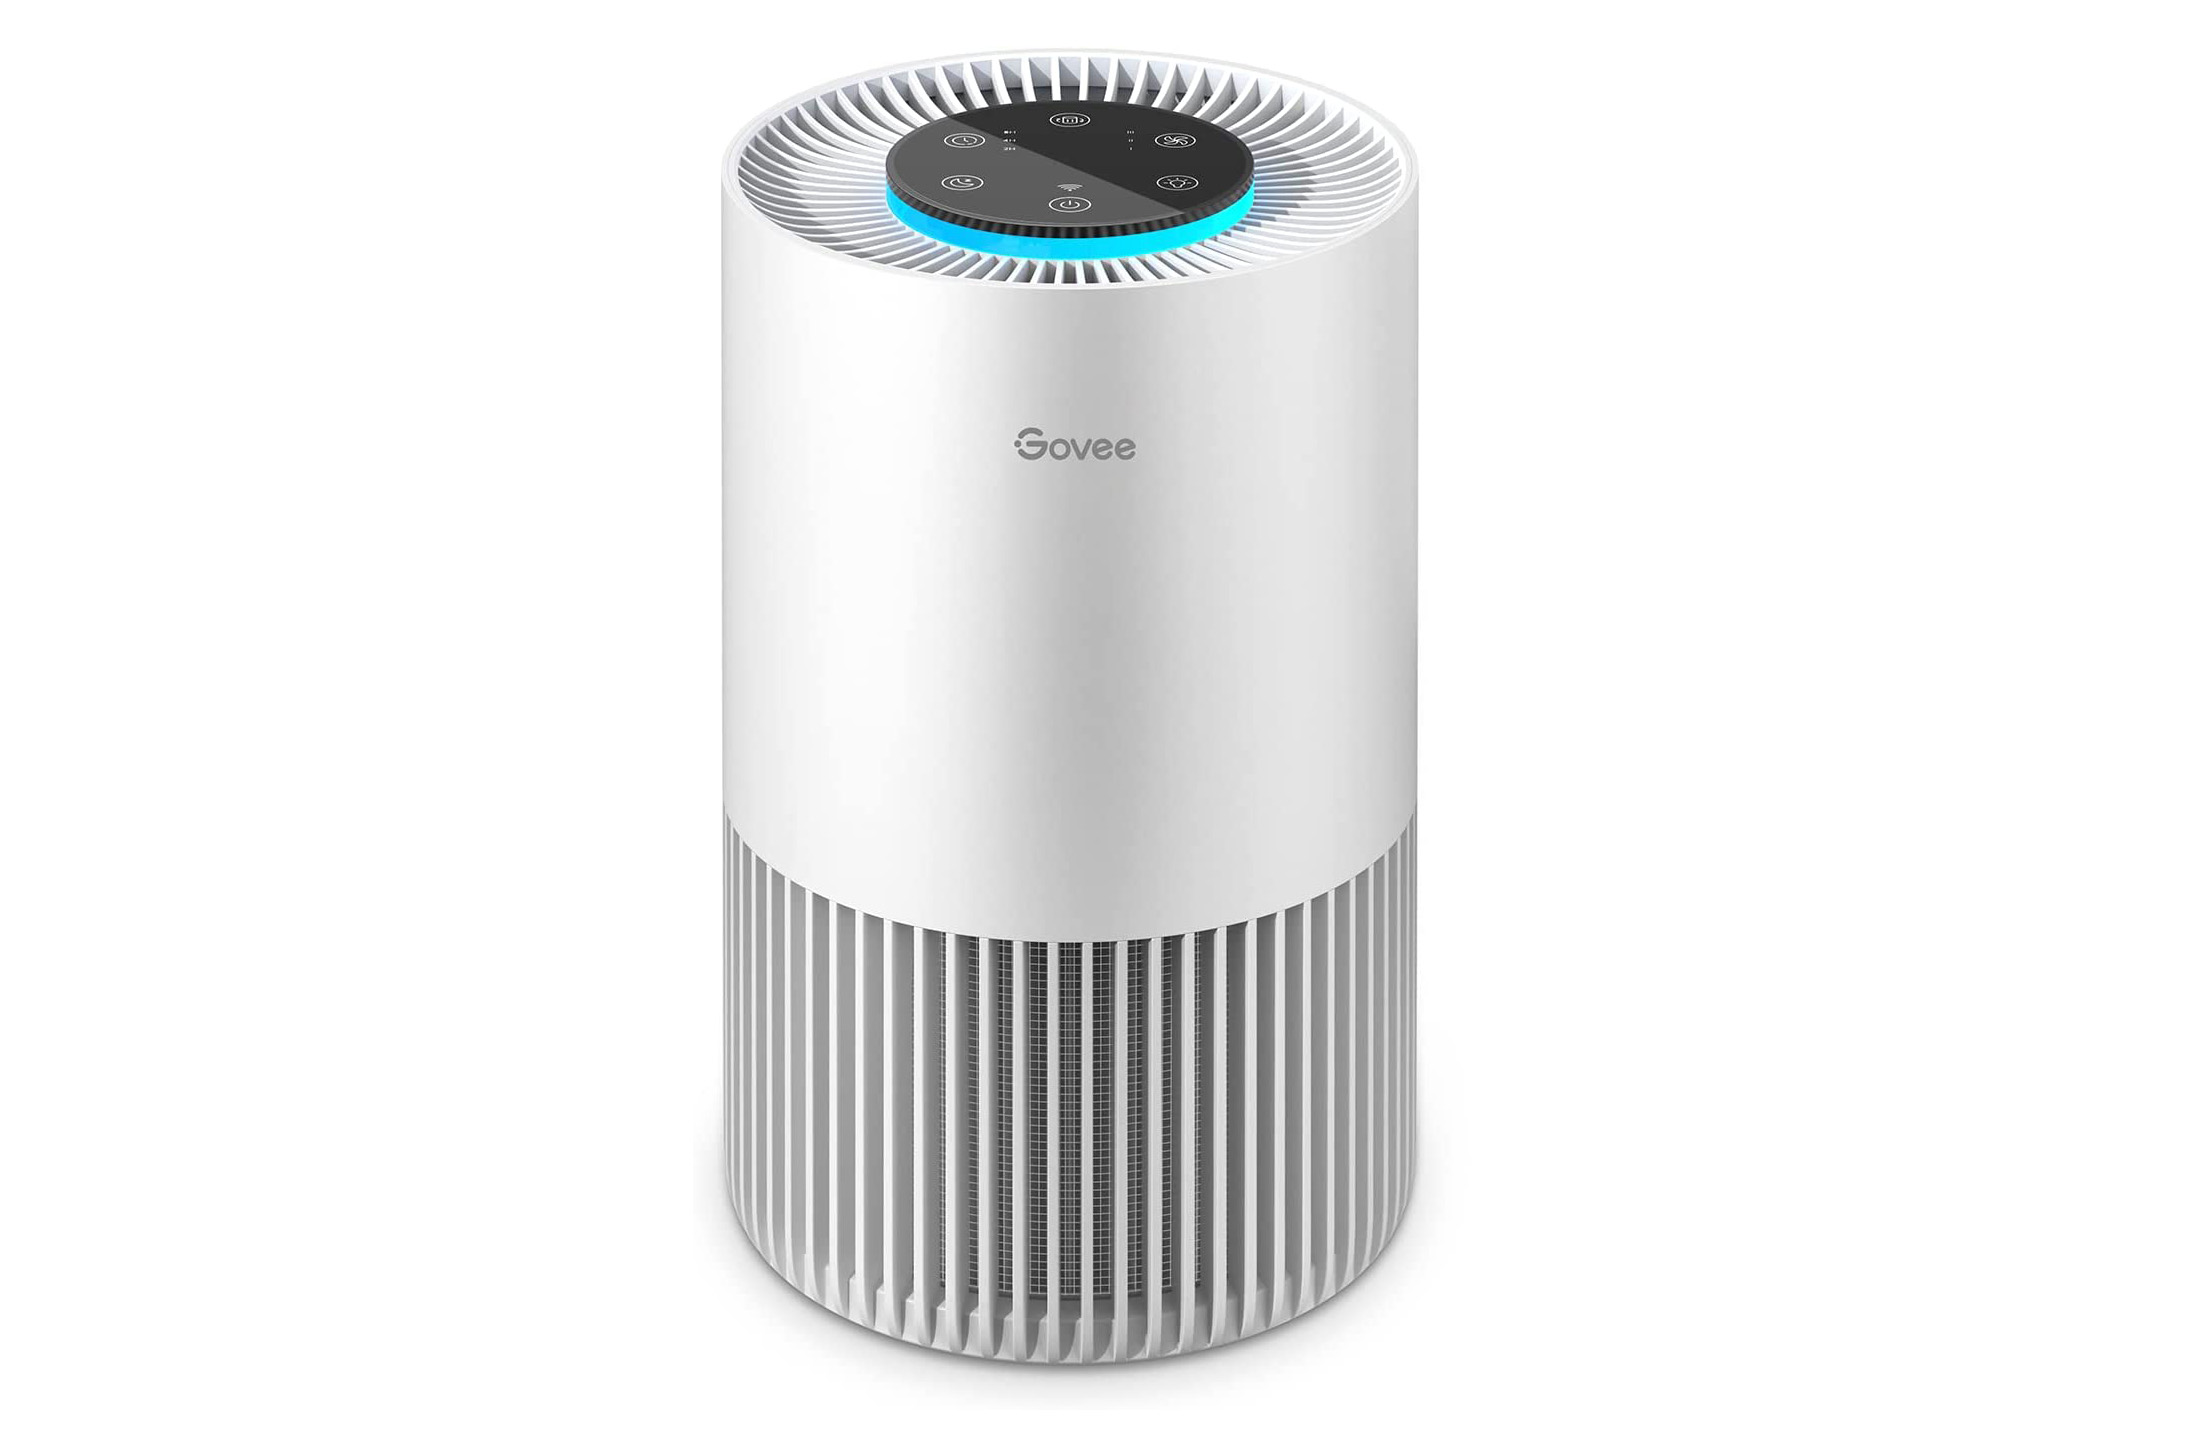 Govee Smart Air Purifier (model H7120) -- Best for small spaces